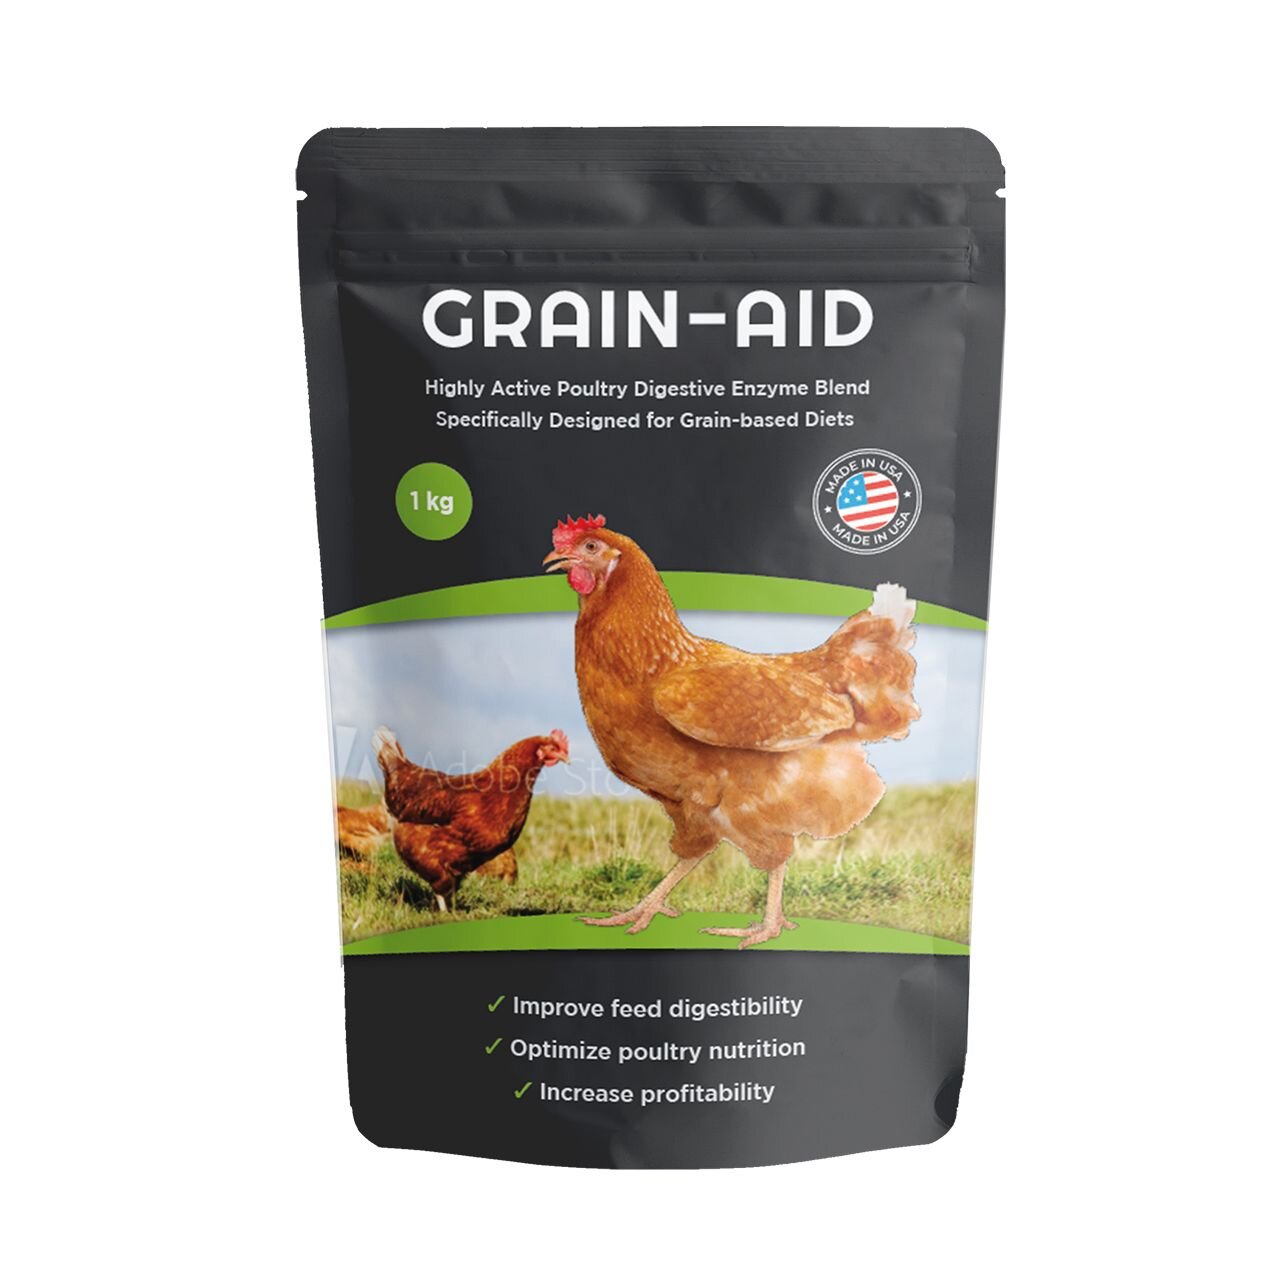 Grain-Aid™ - Highly Active Poultry Digestive Enzyme Blend